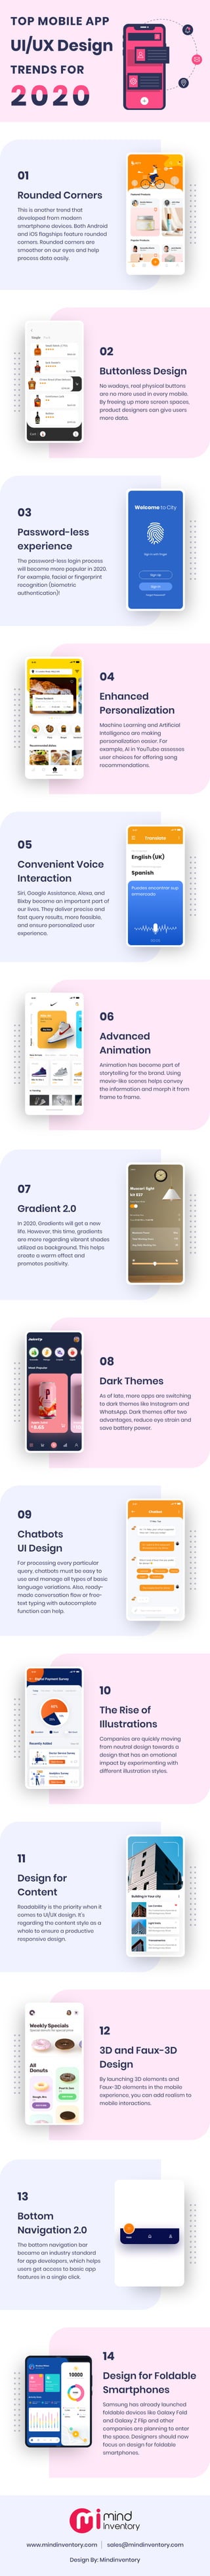 Mobile App UI/UX Design Trends 2020: What's in Store?